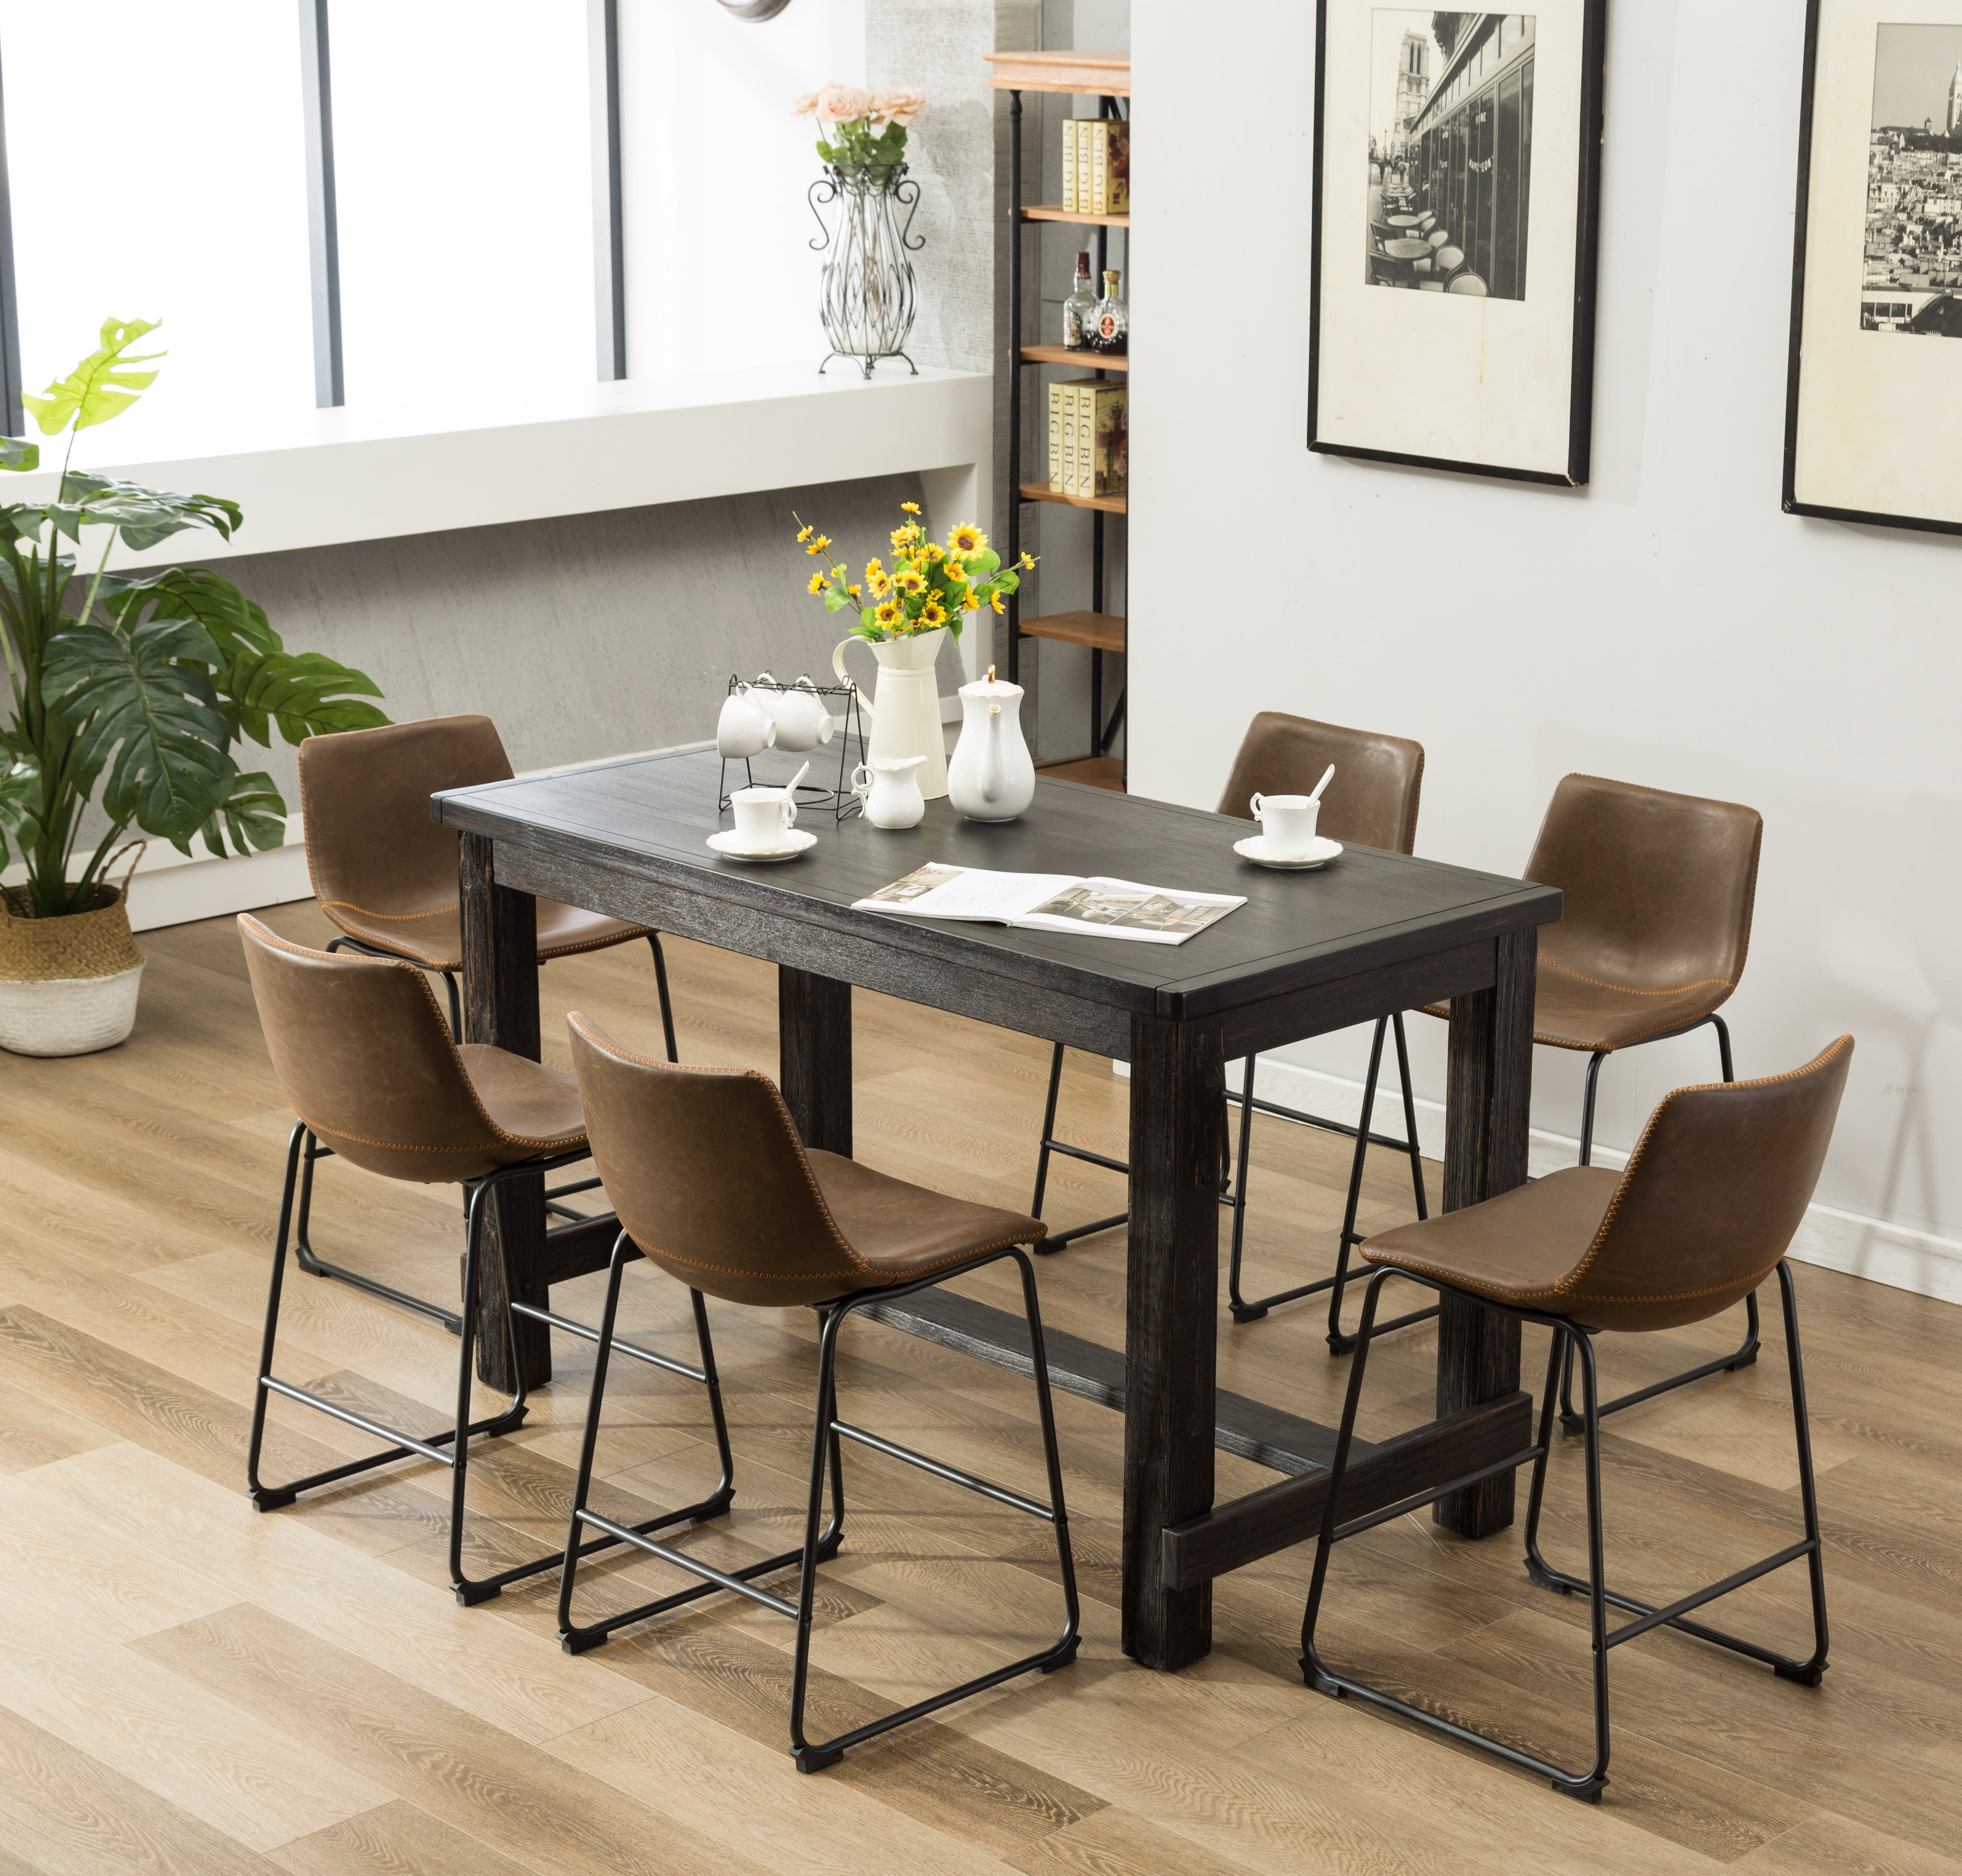 Wooden Dining Table With Leather Chairs, Large Dining Room Table Leather Chairs